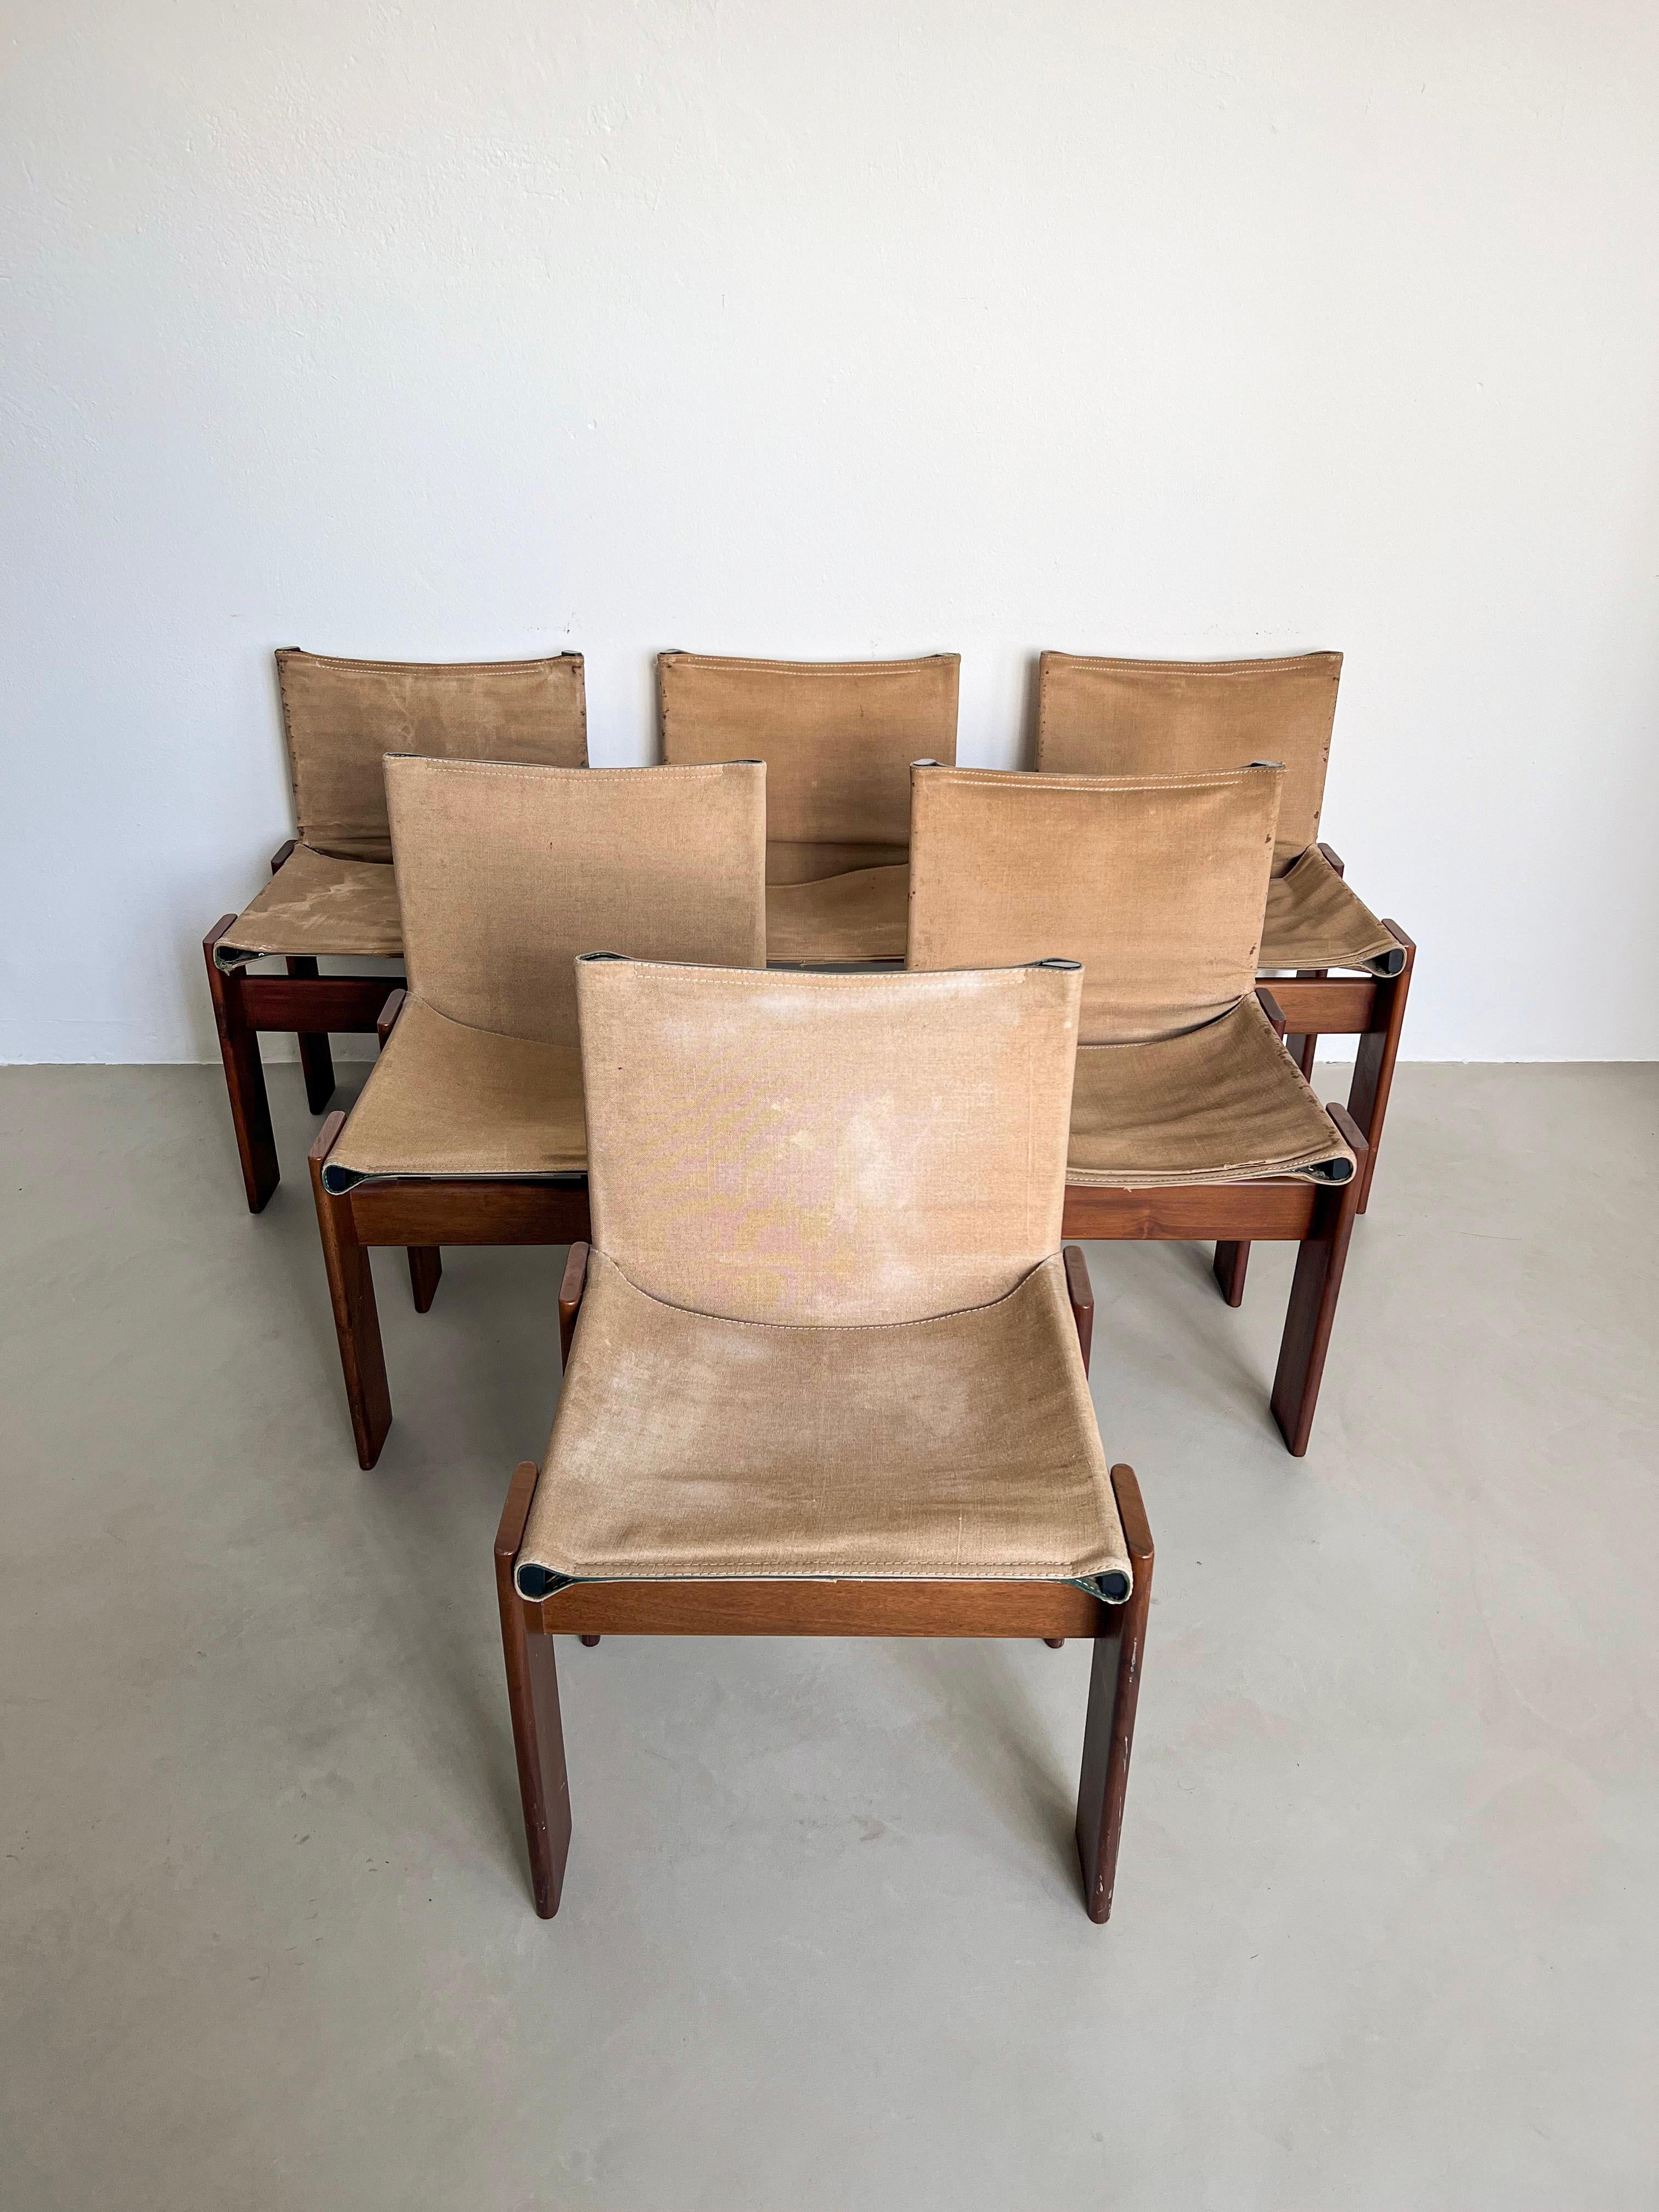 6 Dining Chairs - Monk by Afra e Tobia Scarpa 

Offered for sale is a rare set of six 